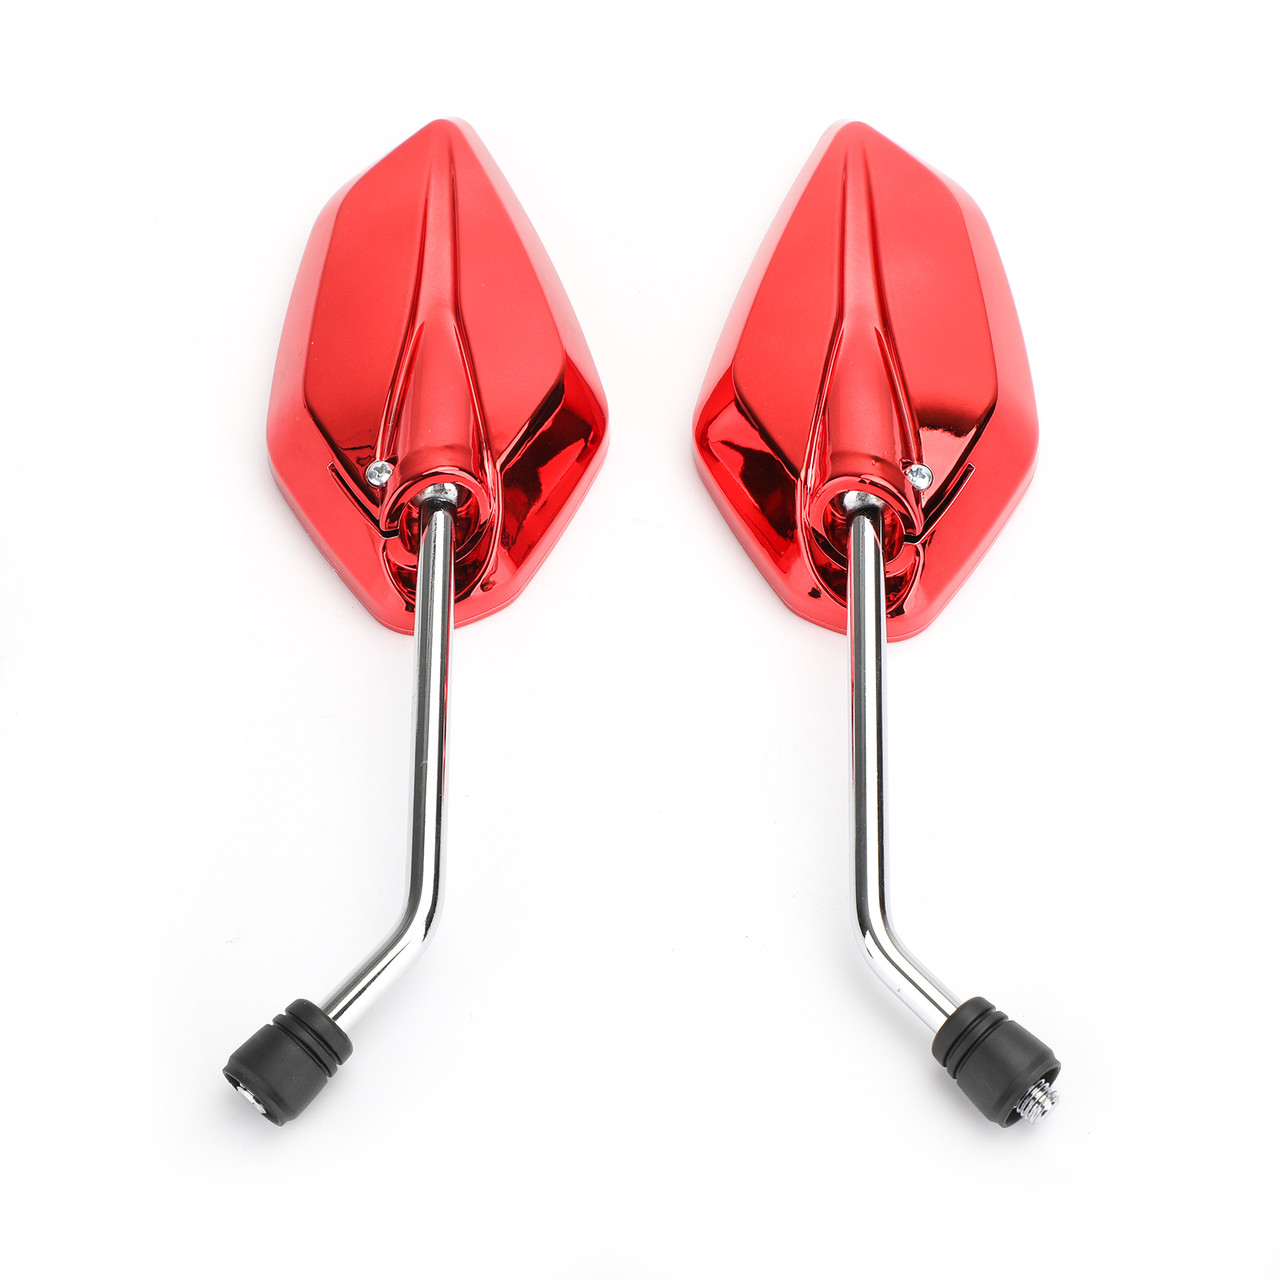 Pair 10mm Rearview Mirrors fits For Kawasaki with 10mm standard thread Red~BC3